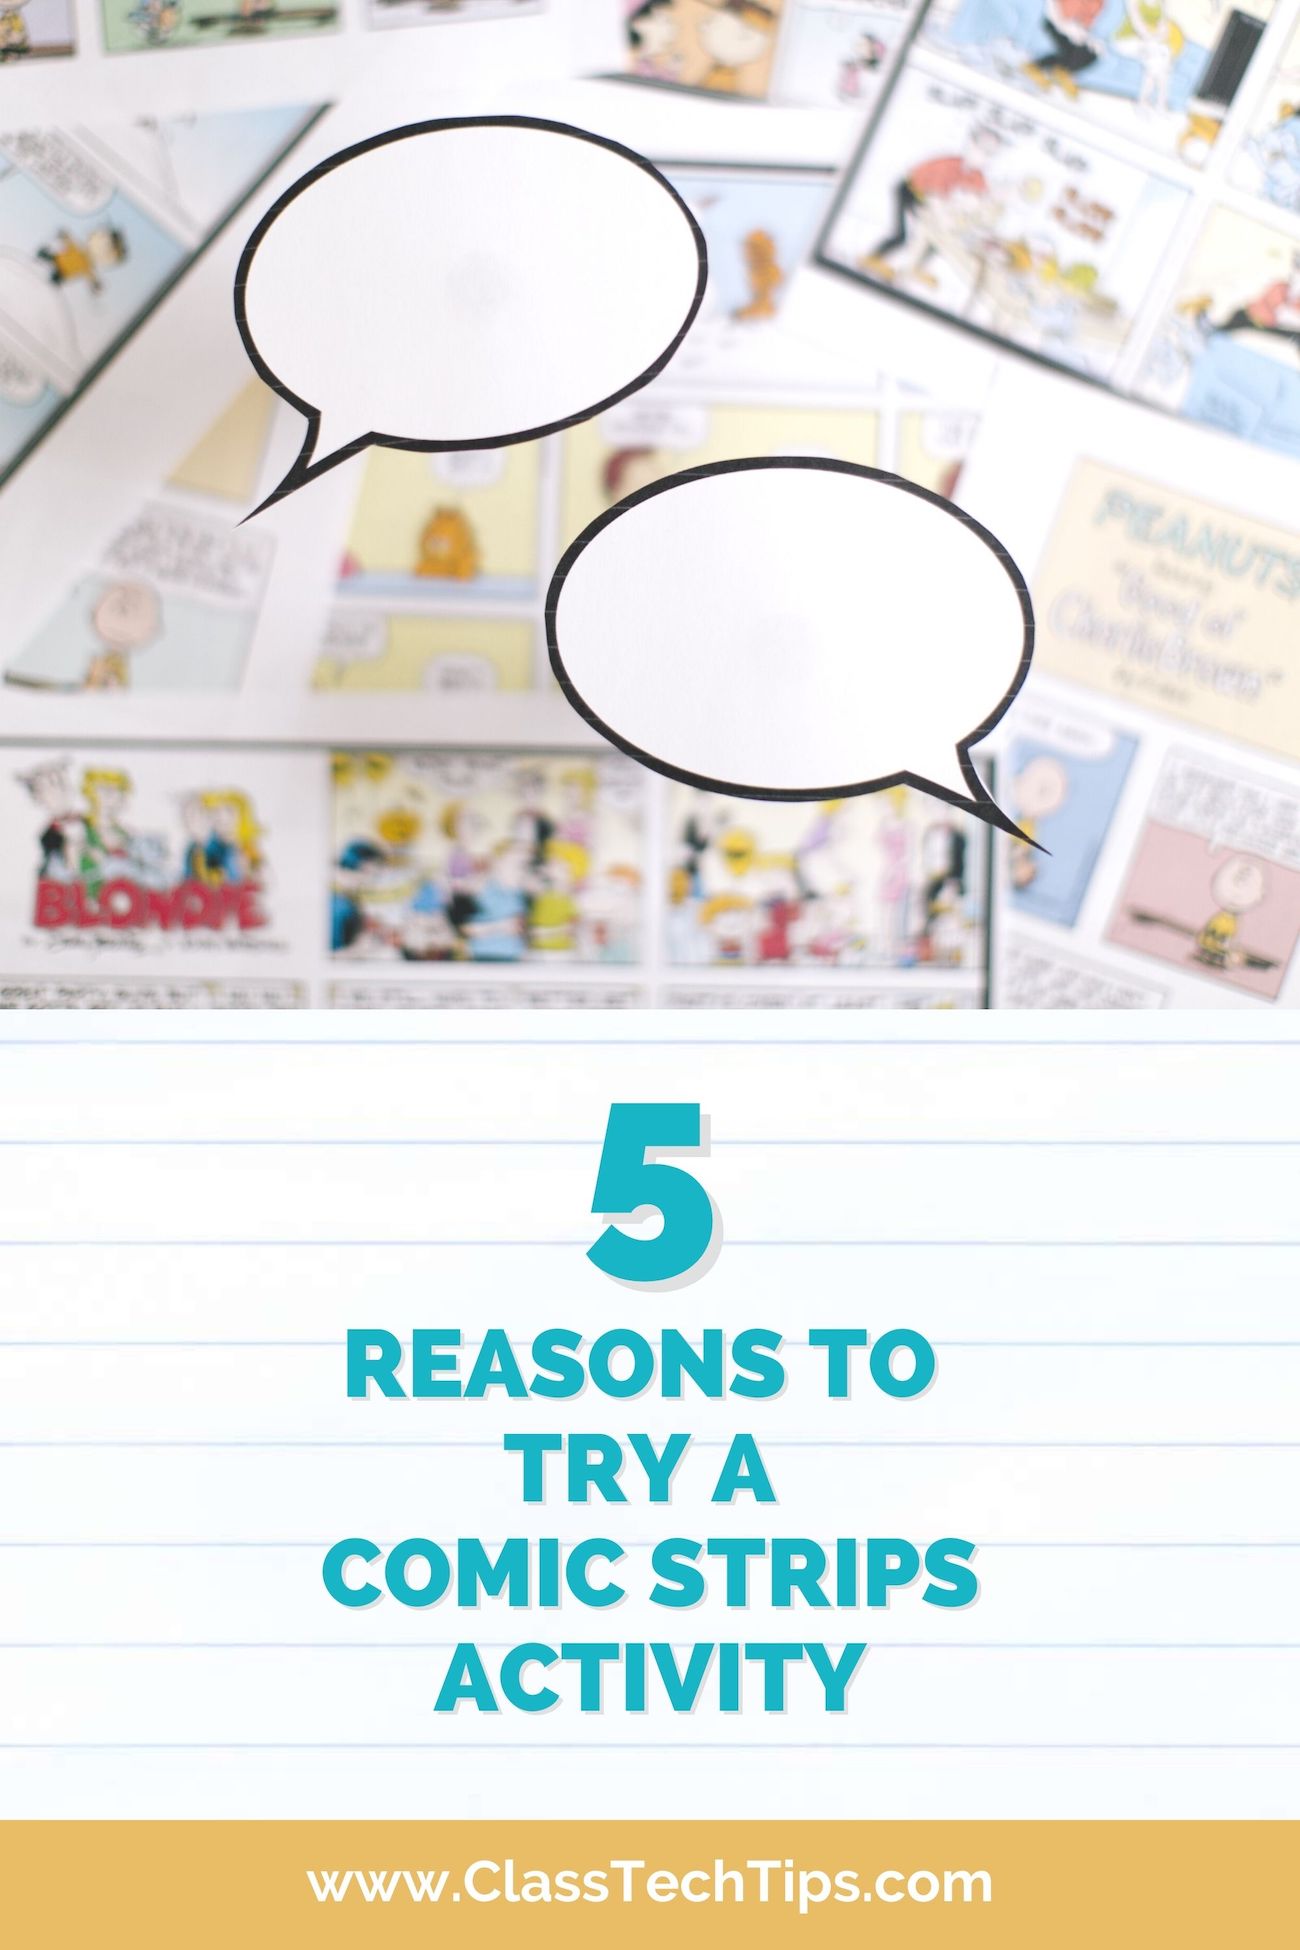 Looking for a creative project idea for your students? Try a comic strips activity in your classroom to build ELA skills in any subject area.